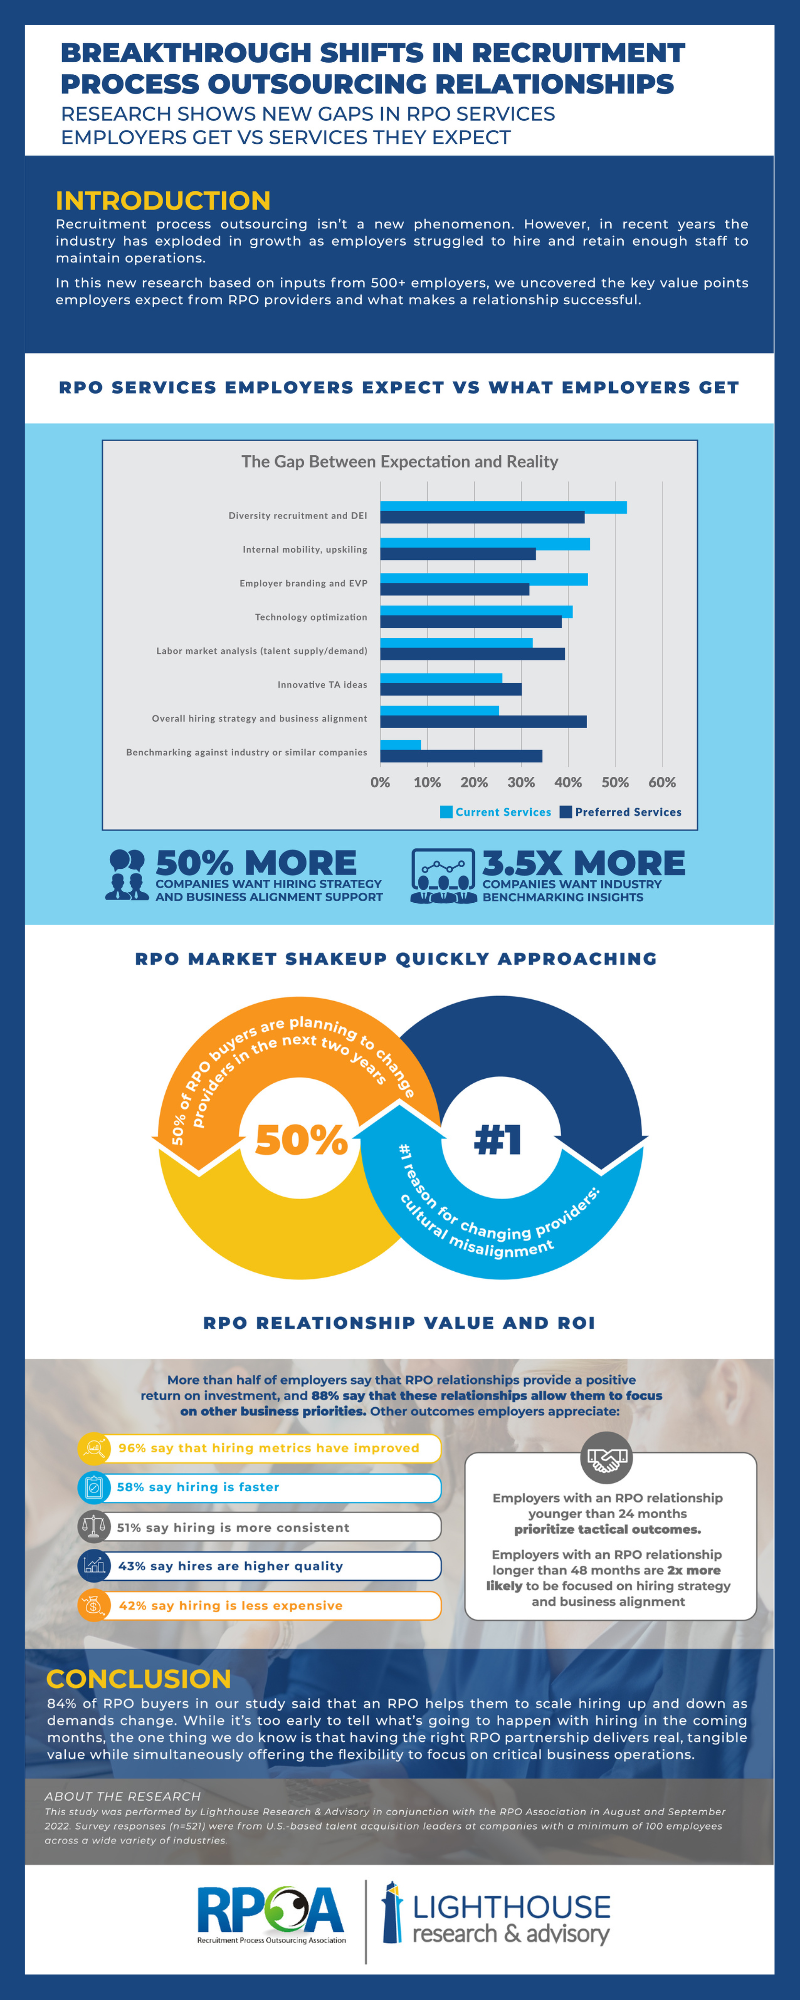 New Infographic: Breakthrough Shifts in RPO Relationships